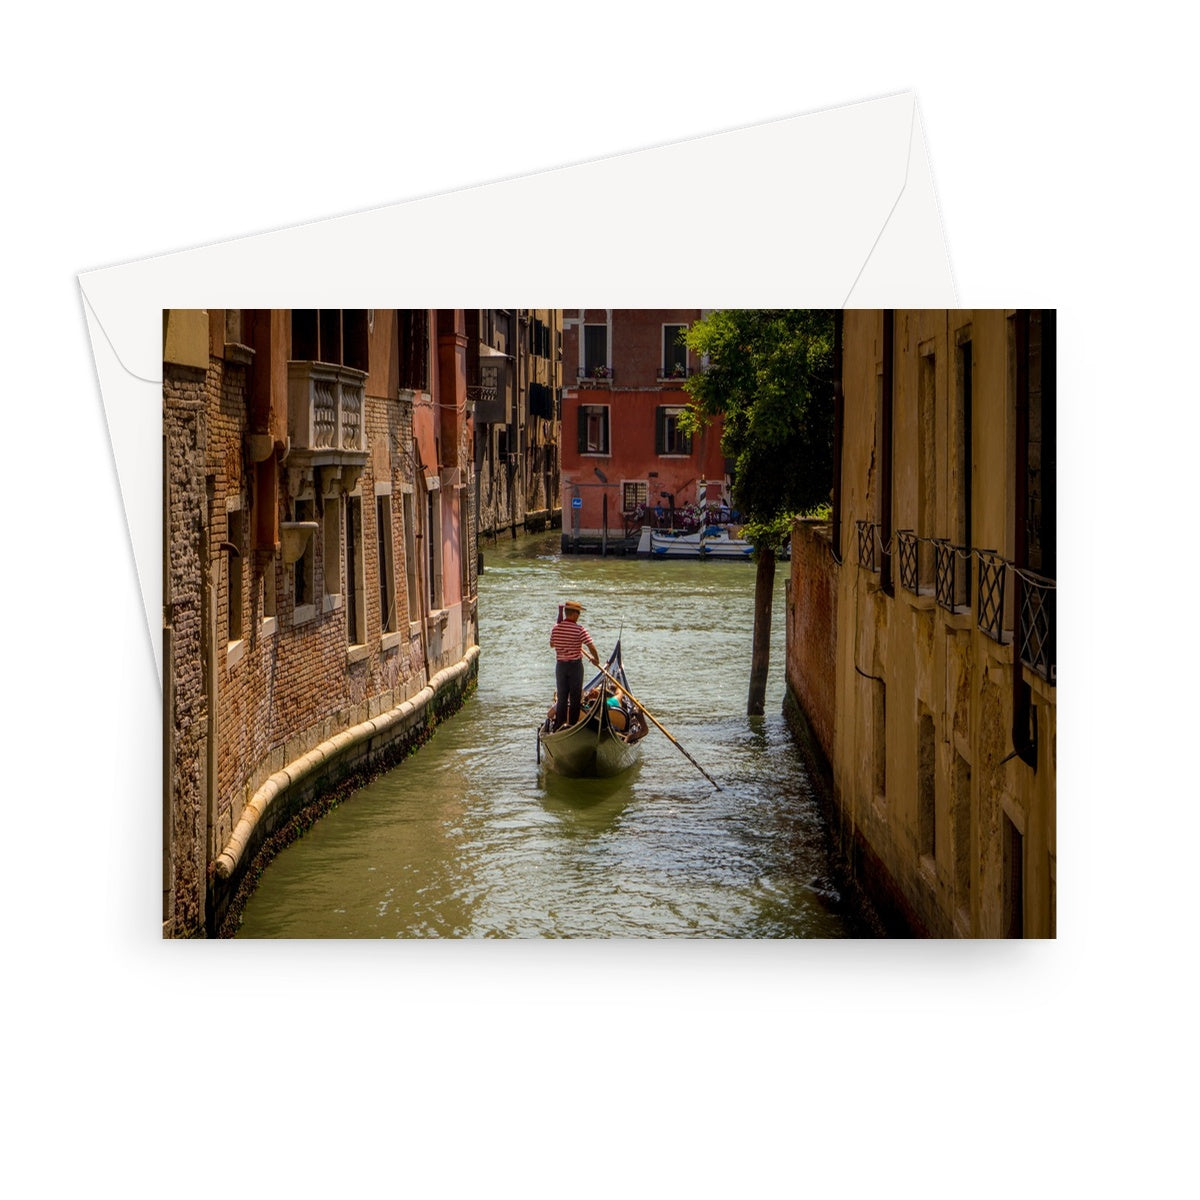 Gondola with gondolier wearing a traditional boater hat and striped top on a  canal in Venice. Italy. Greeting Card